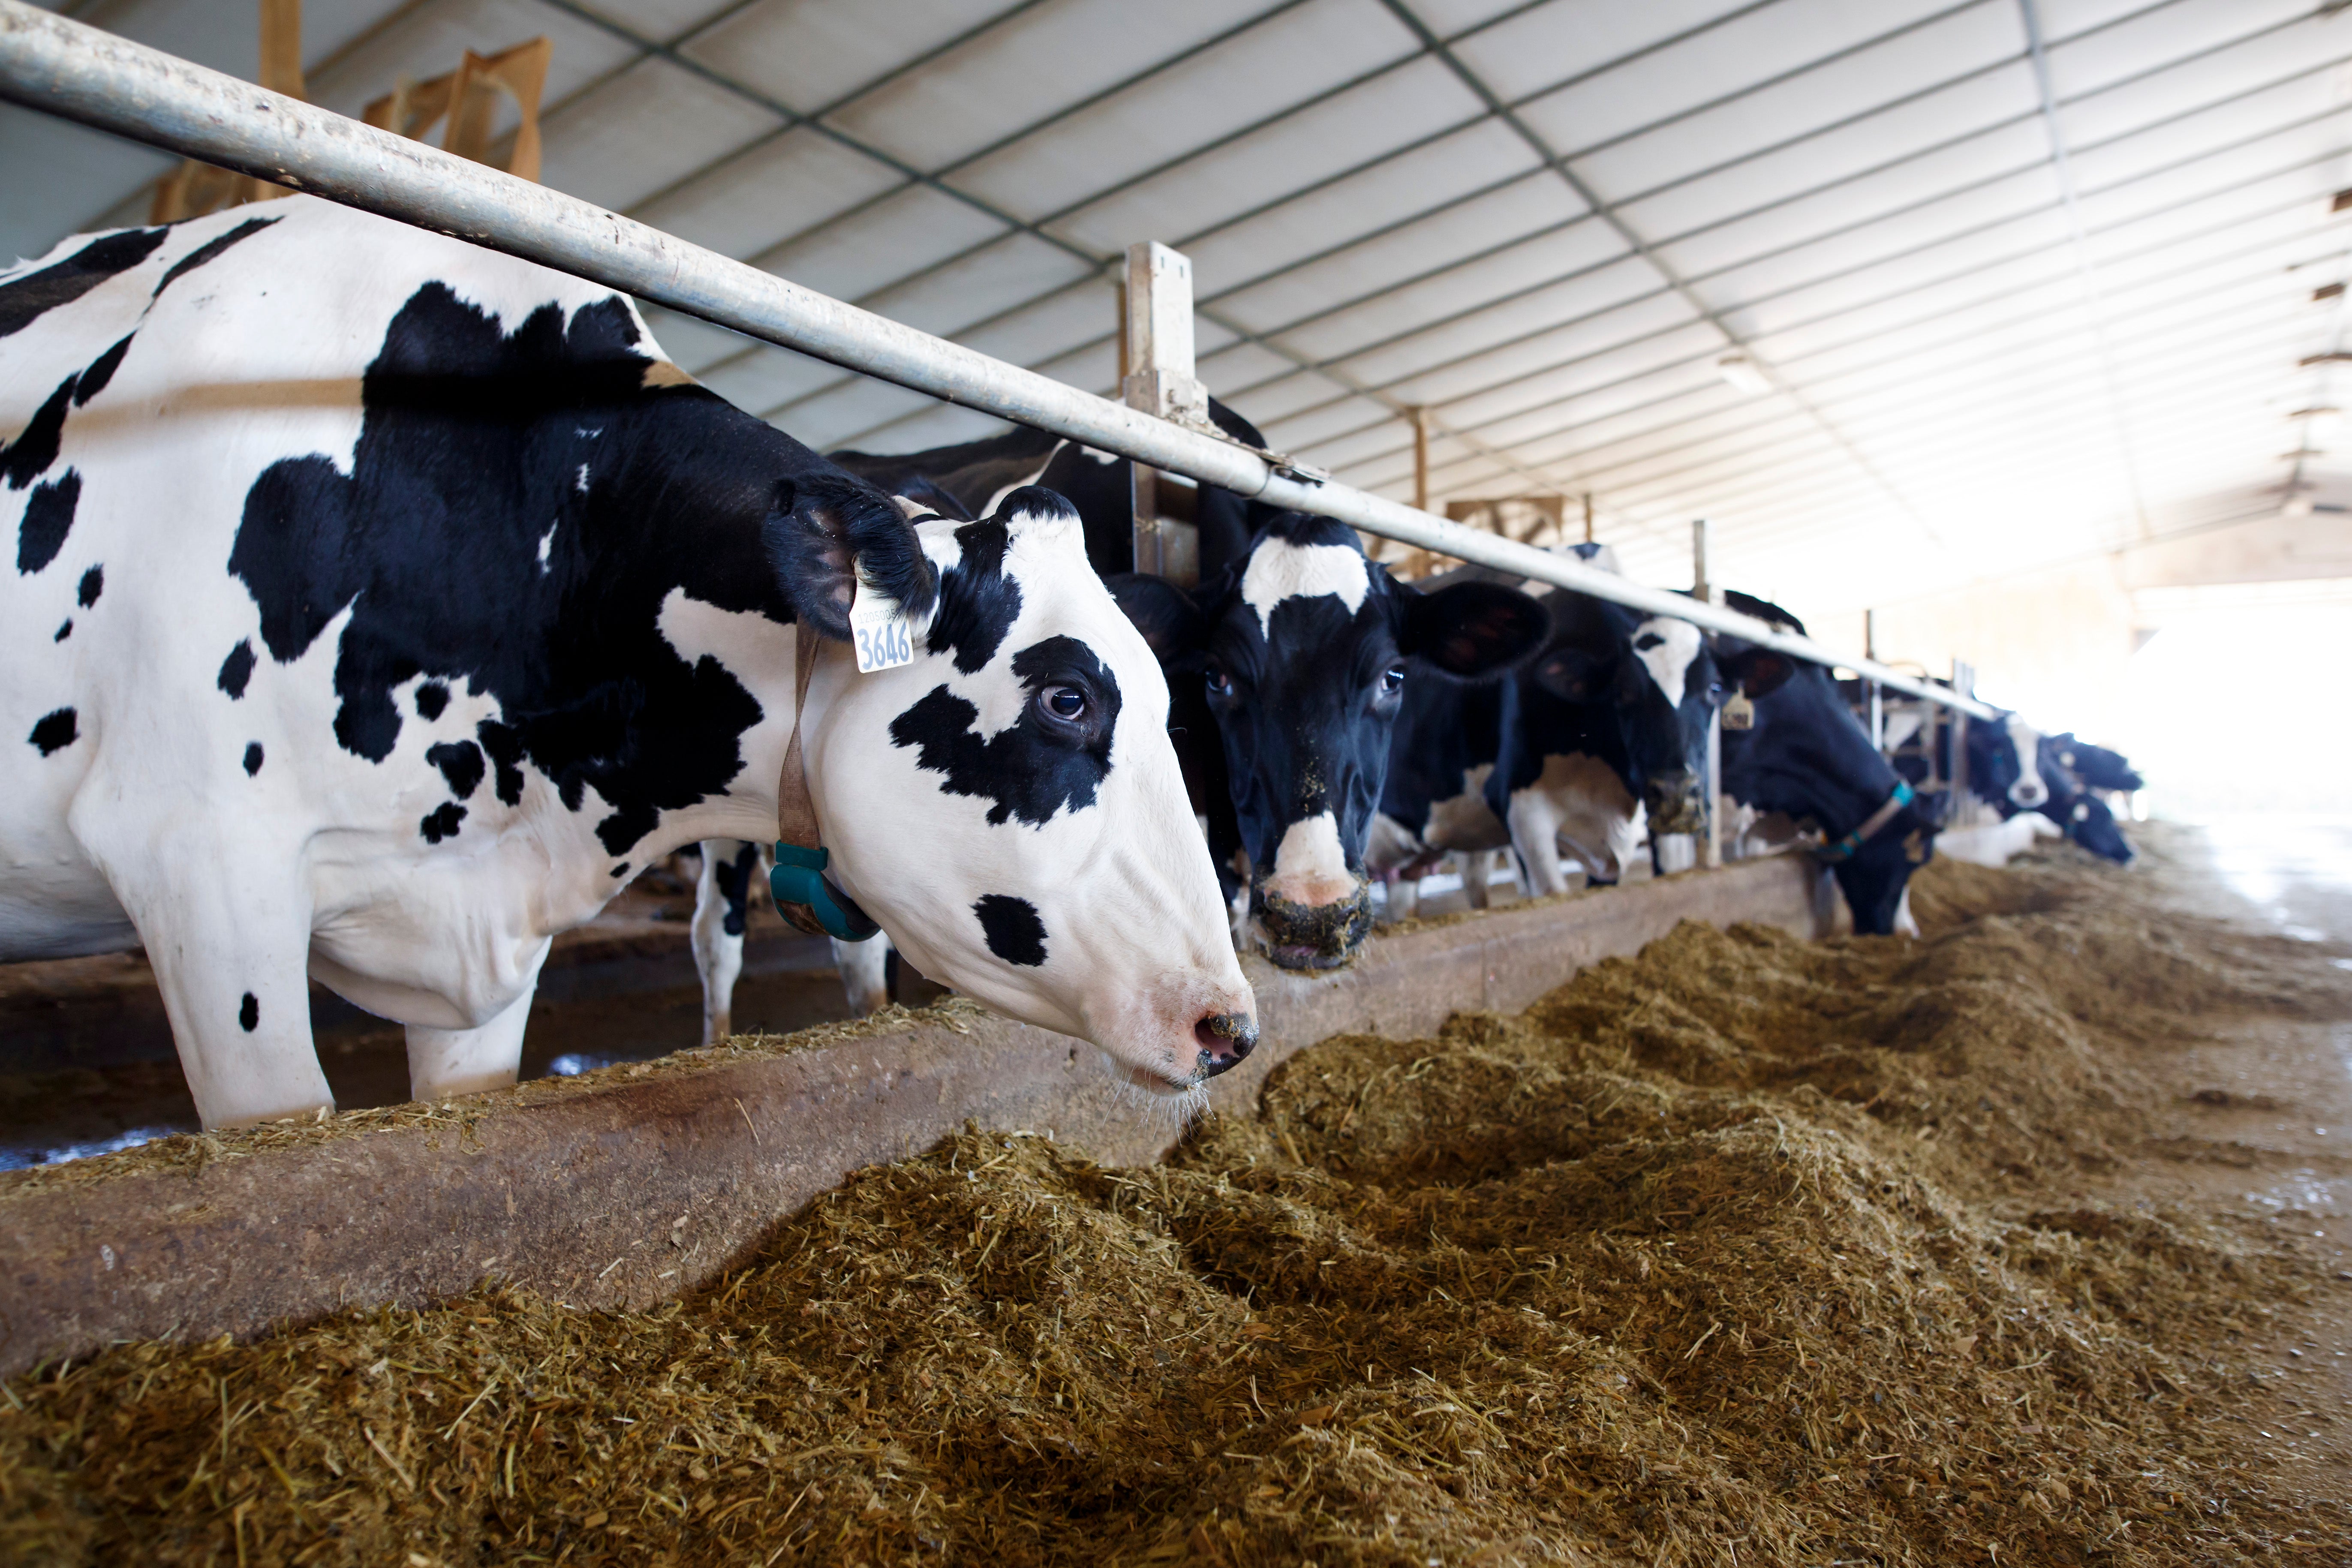 From Two Bulls, Nine Million Dairy Cows - Scientific American